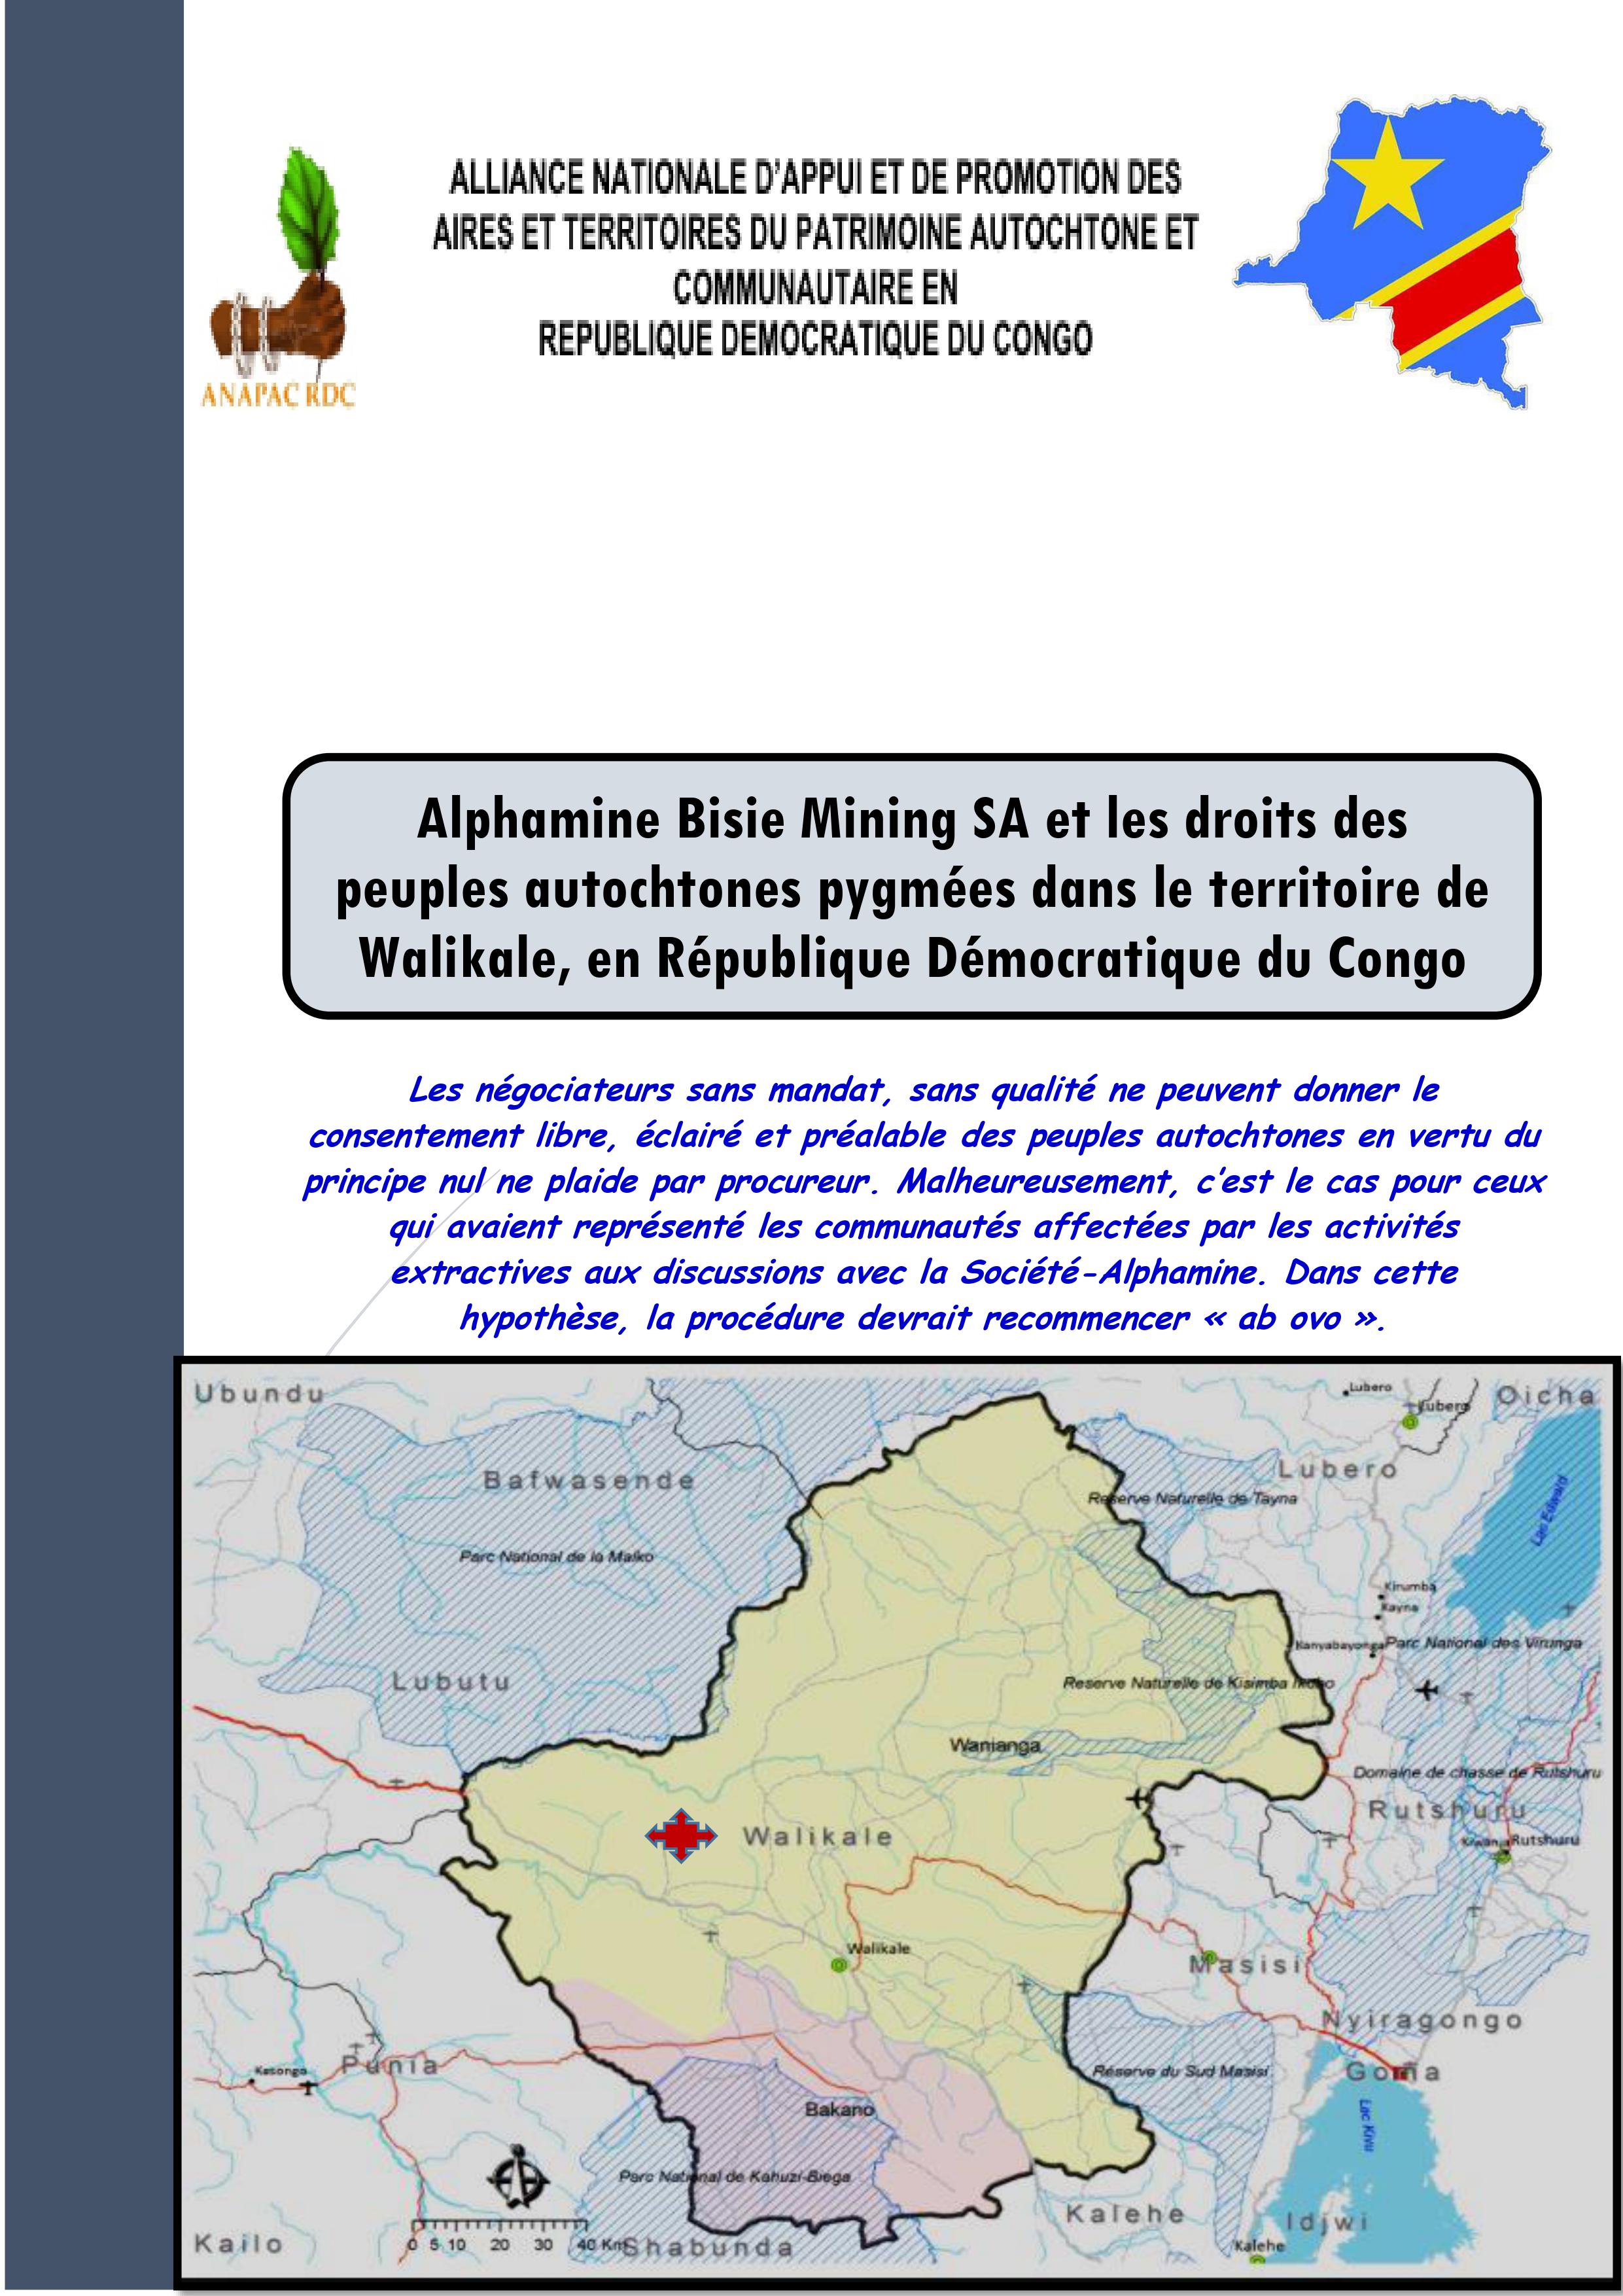 (FR) Alphamin Bisie Mining SA and the Rights of Indigenous Pygmy Peoples in Walikale territory, in the Democratic Republic of Congo